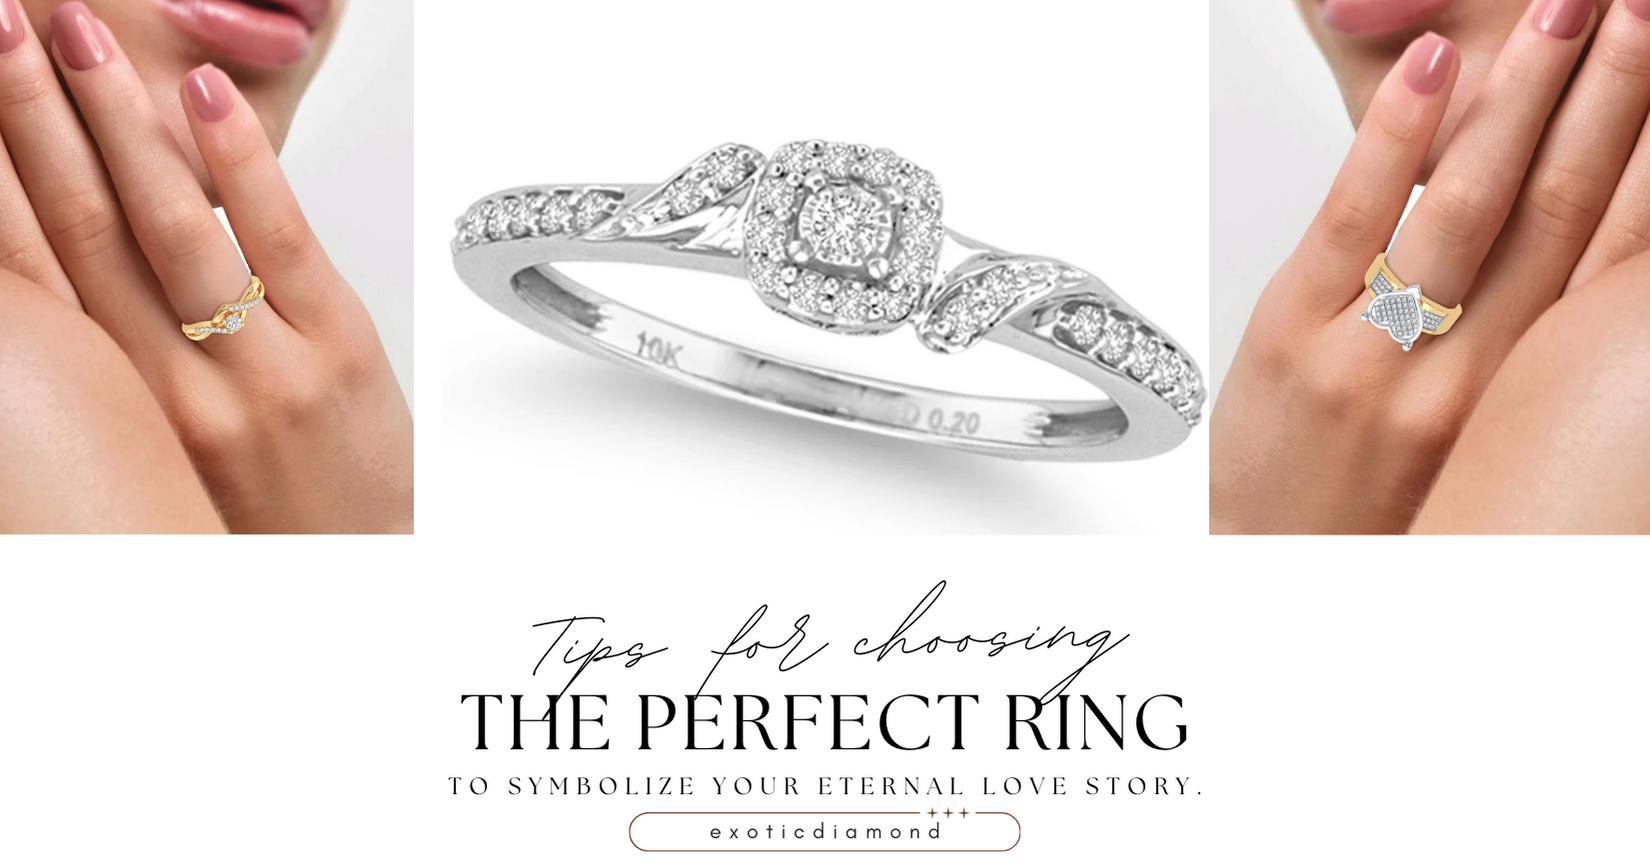 Tips for choosing the perfect ring to symbolize your eternal love story